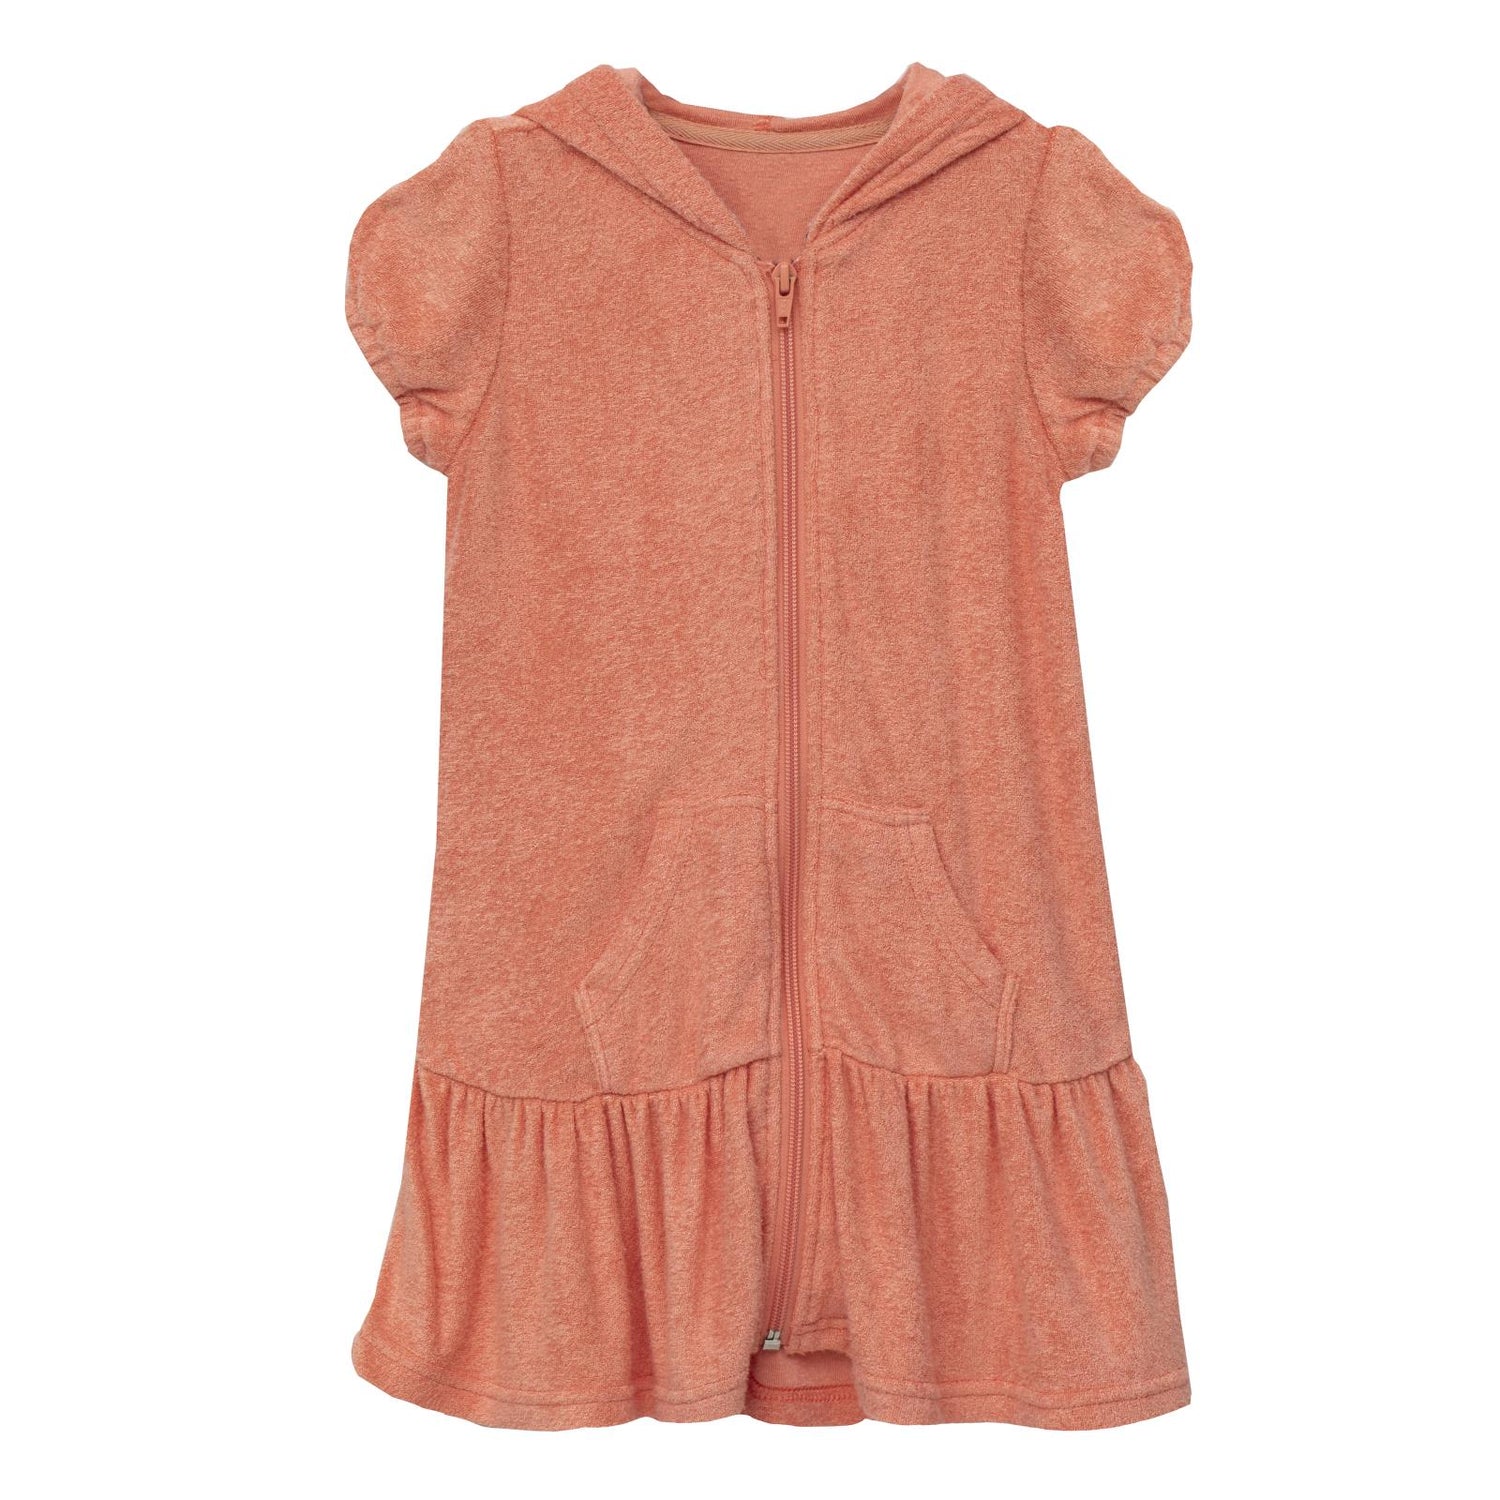 Terry Ruffle Swim Cover-Up in Blush